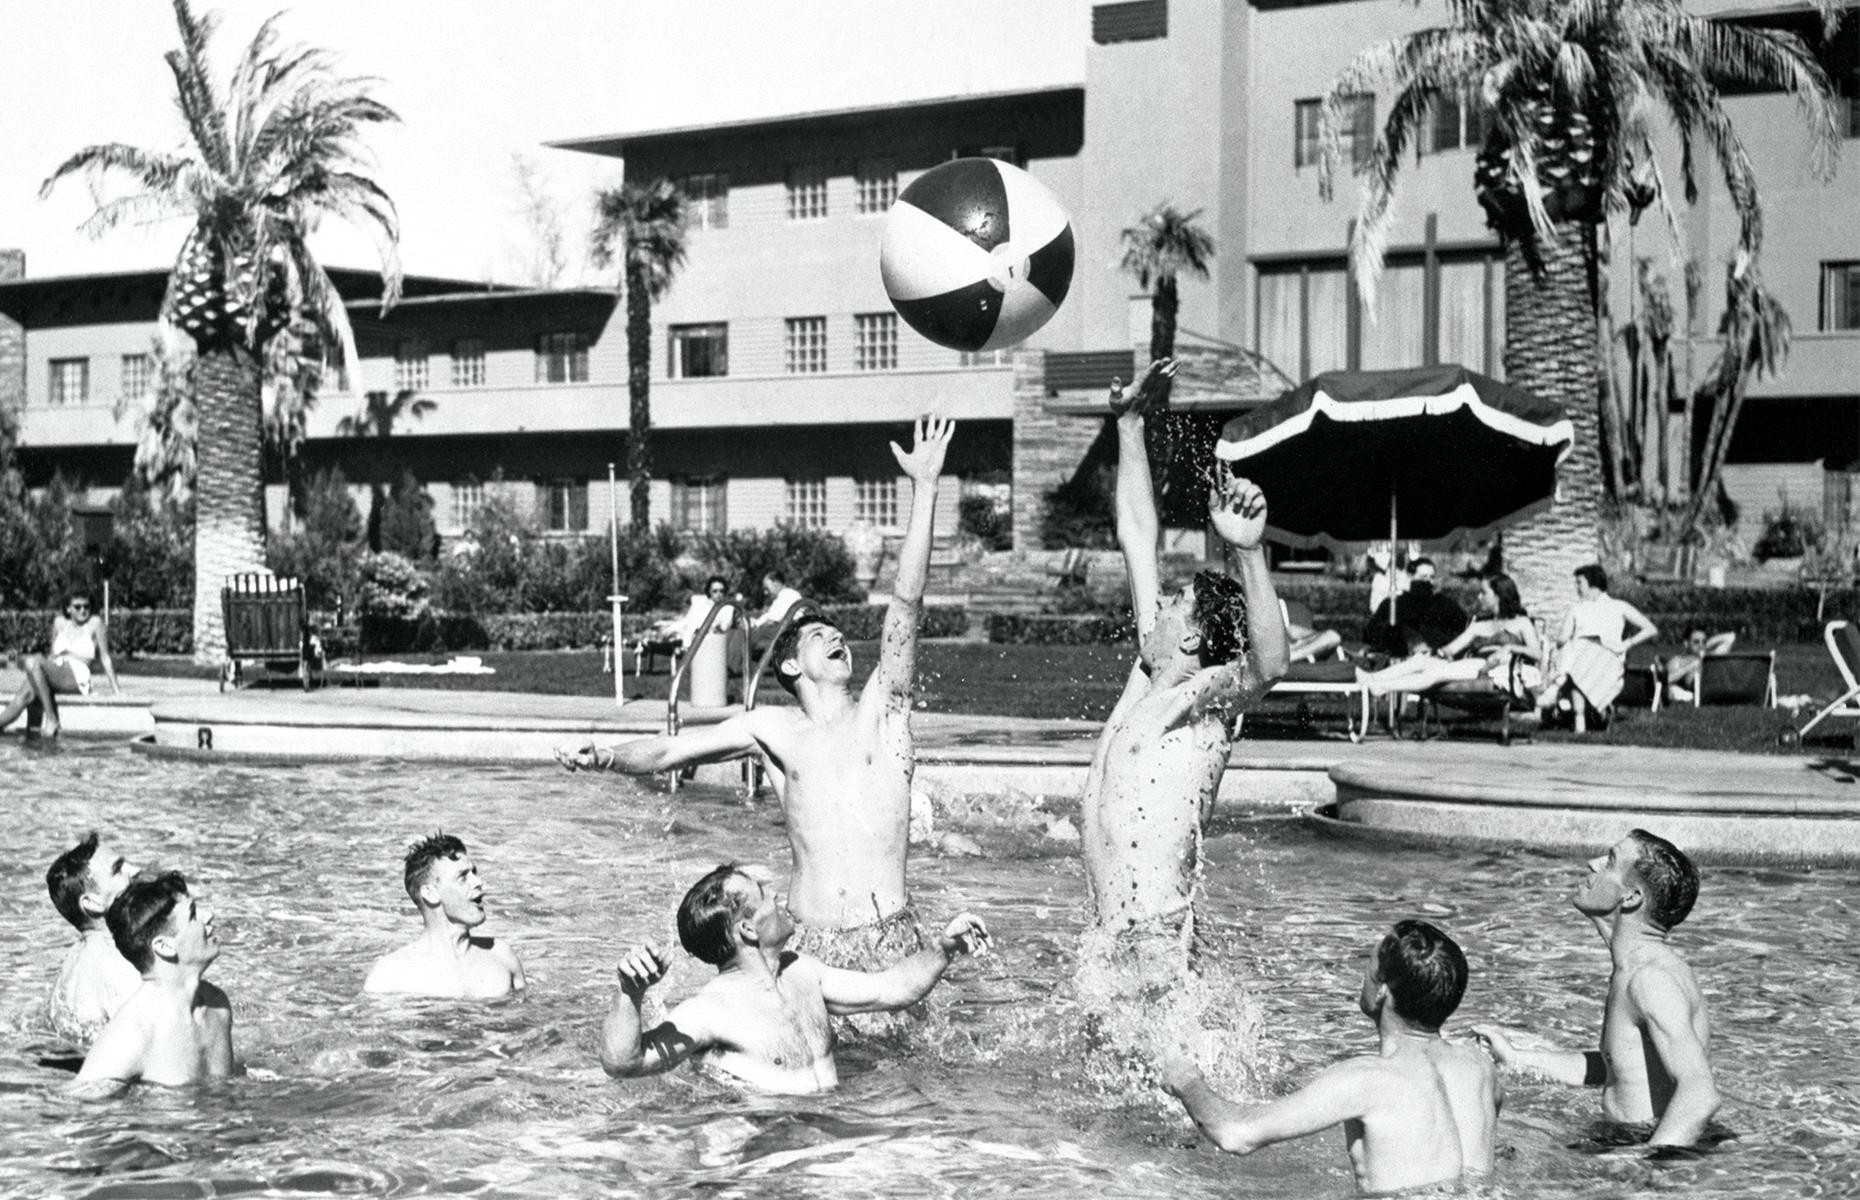 Flamingo Las Vegas' affluent guests weren't afraid to make a splash though. Here a group of young men play a game of water polo in the pool, as other guests look on from the patio. The shot was taken circa 1950.